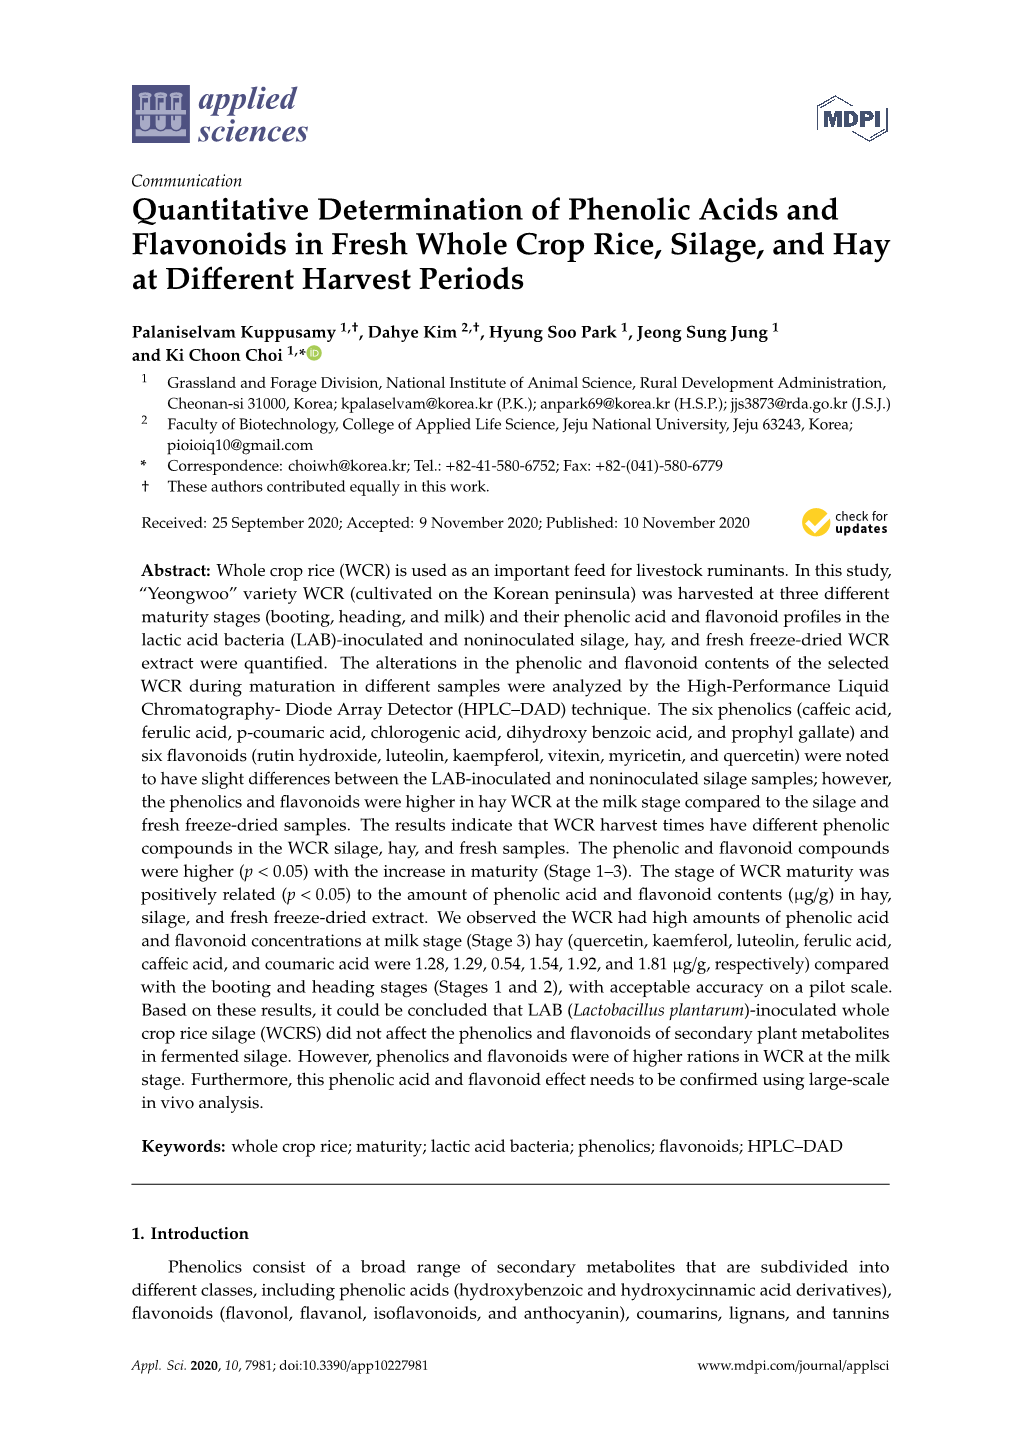 Quantitative Determination of Phenolic Acids and Flavonoids in Fresh Whole Crop Rice, Silage, and Hay at Diﬀerent Harvest Periods